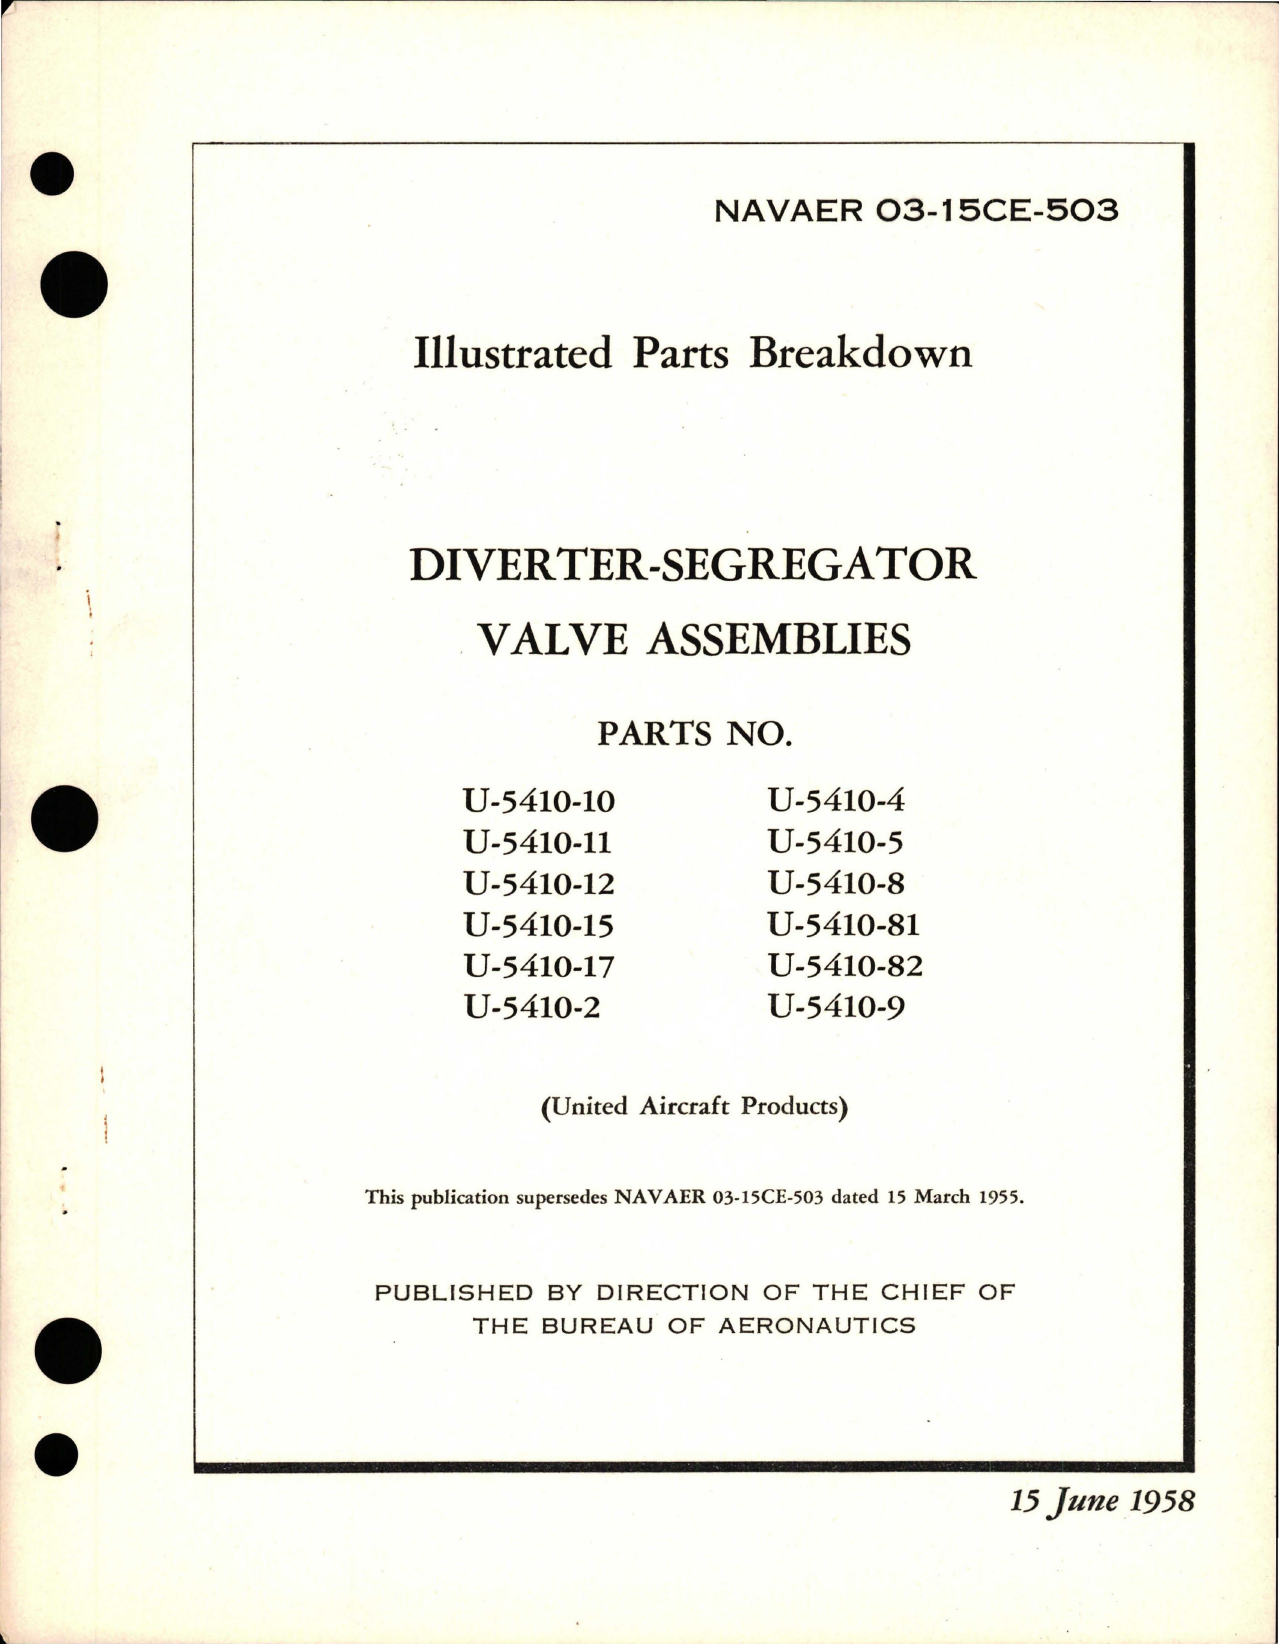 Sample page 1 from AirCorps Library document: Illustrated Parts Breakdown for Diverter Segregator Valve Assemblies